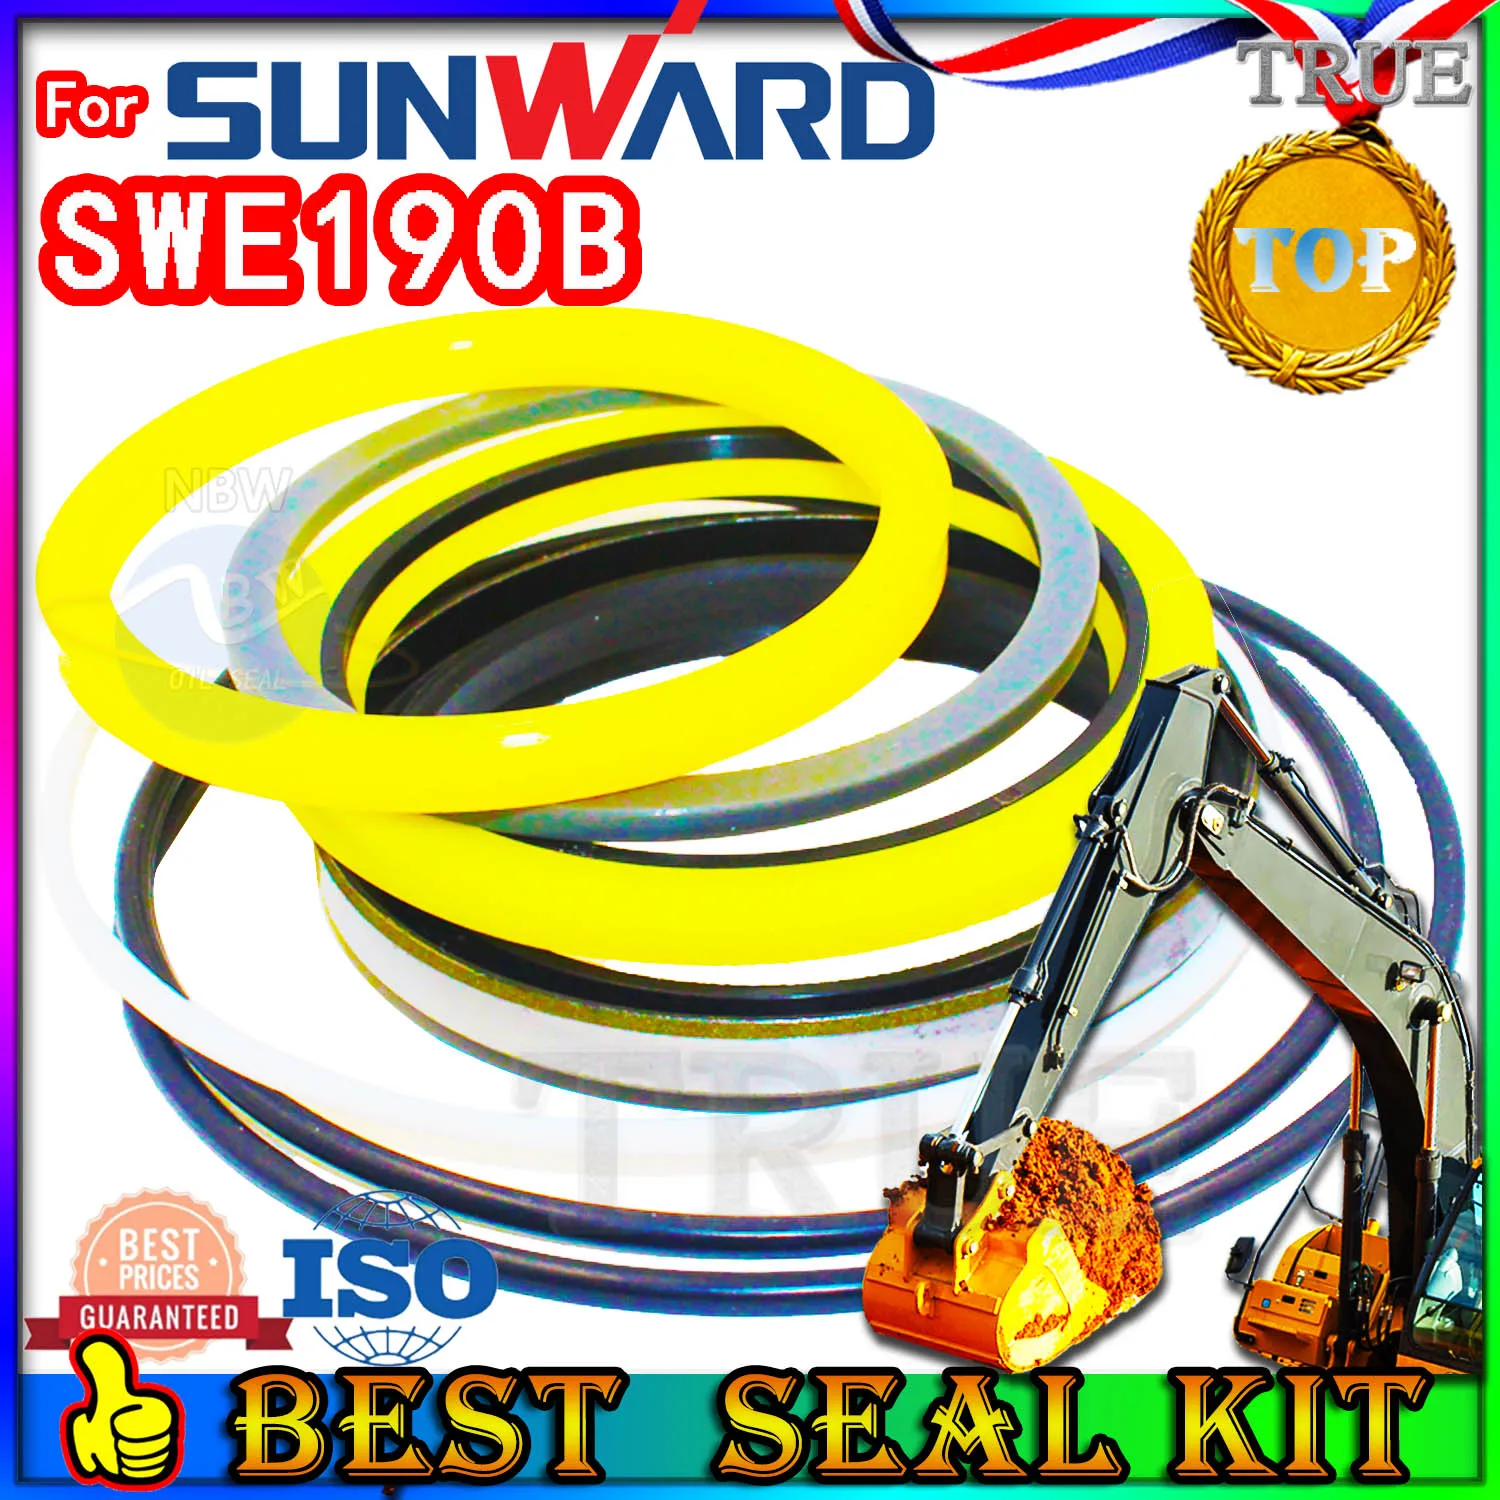 

For Sunward SWE190B Oil Seal Repair Kit Boom Arm Bucket Excavator Hydraulic Cylinder Fix Best Reliable Mend proof Center Swivel